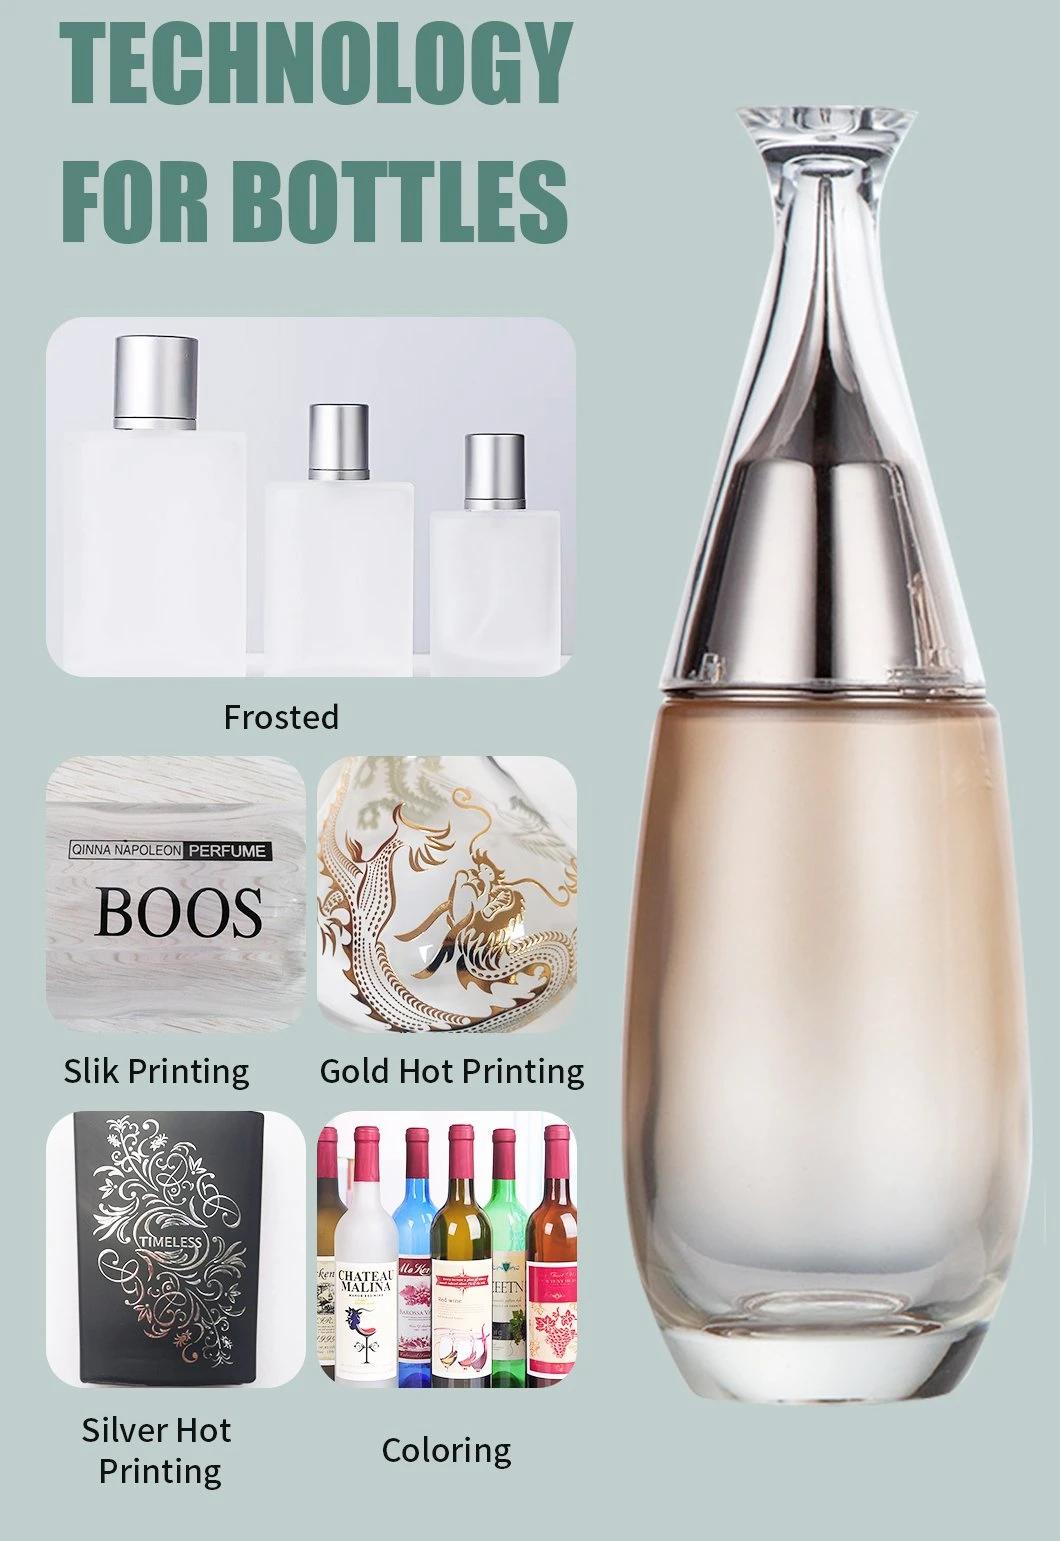 Silver Pump Metal Shoulder Thick Base Glass Bottles for Makeups Personal Care